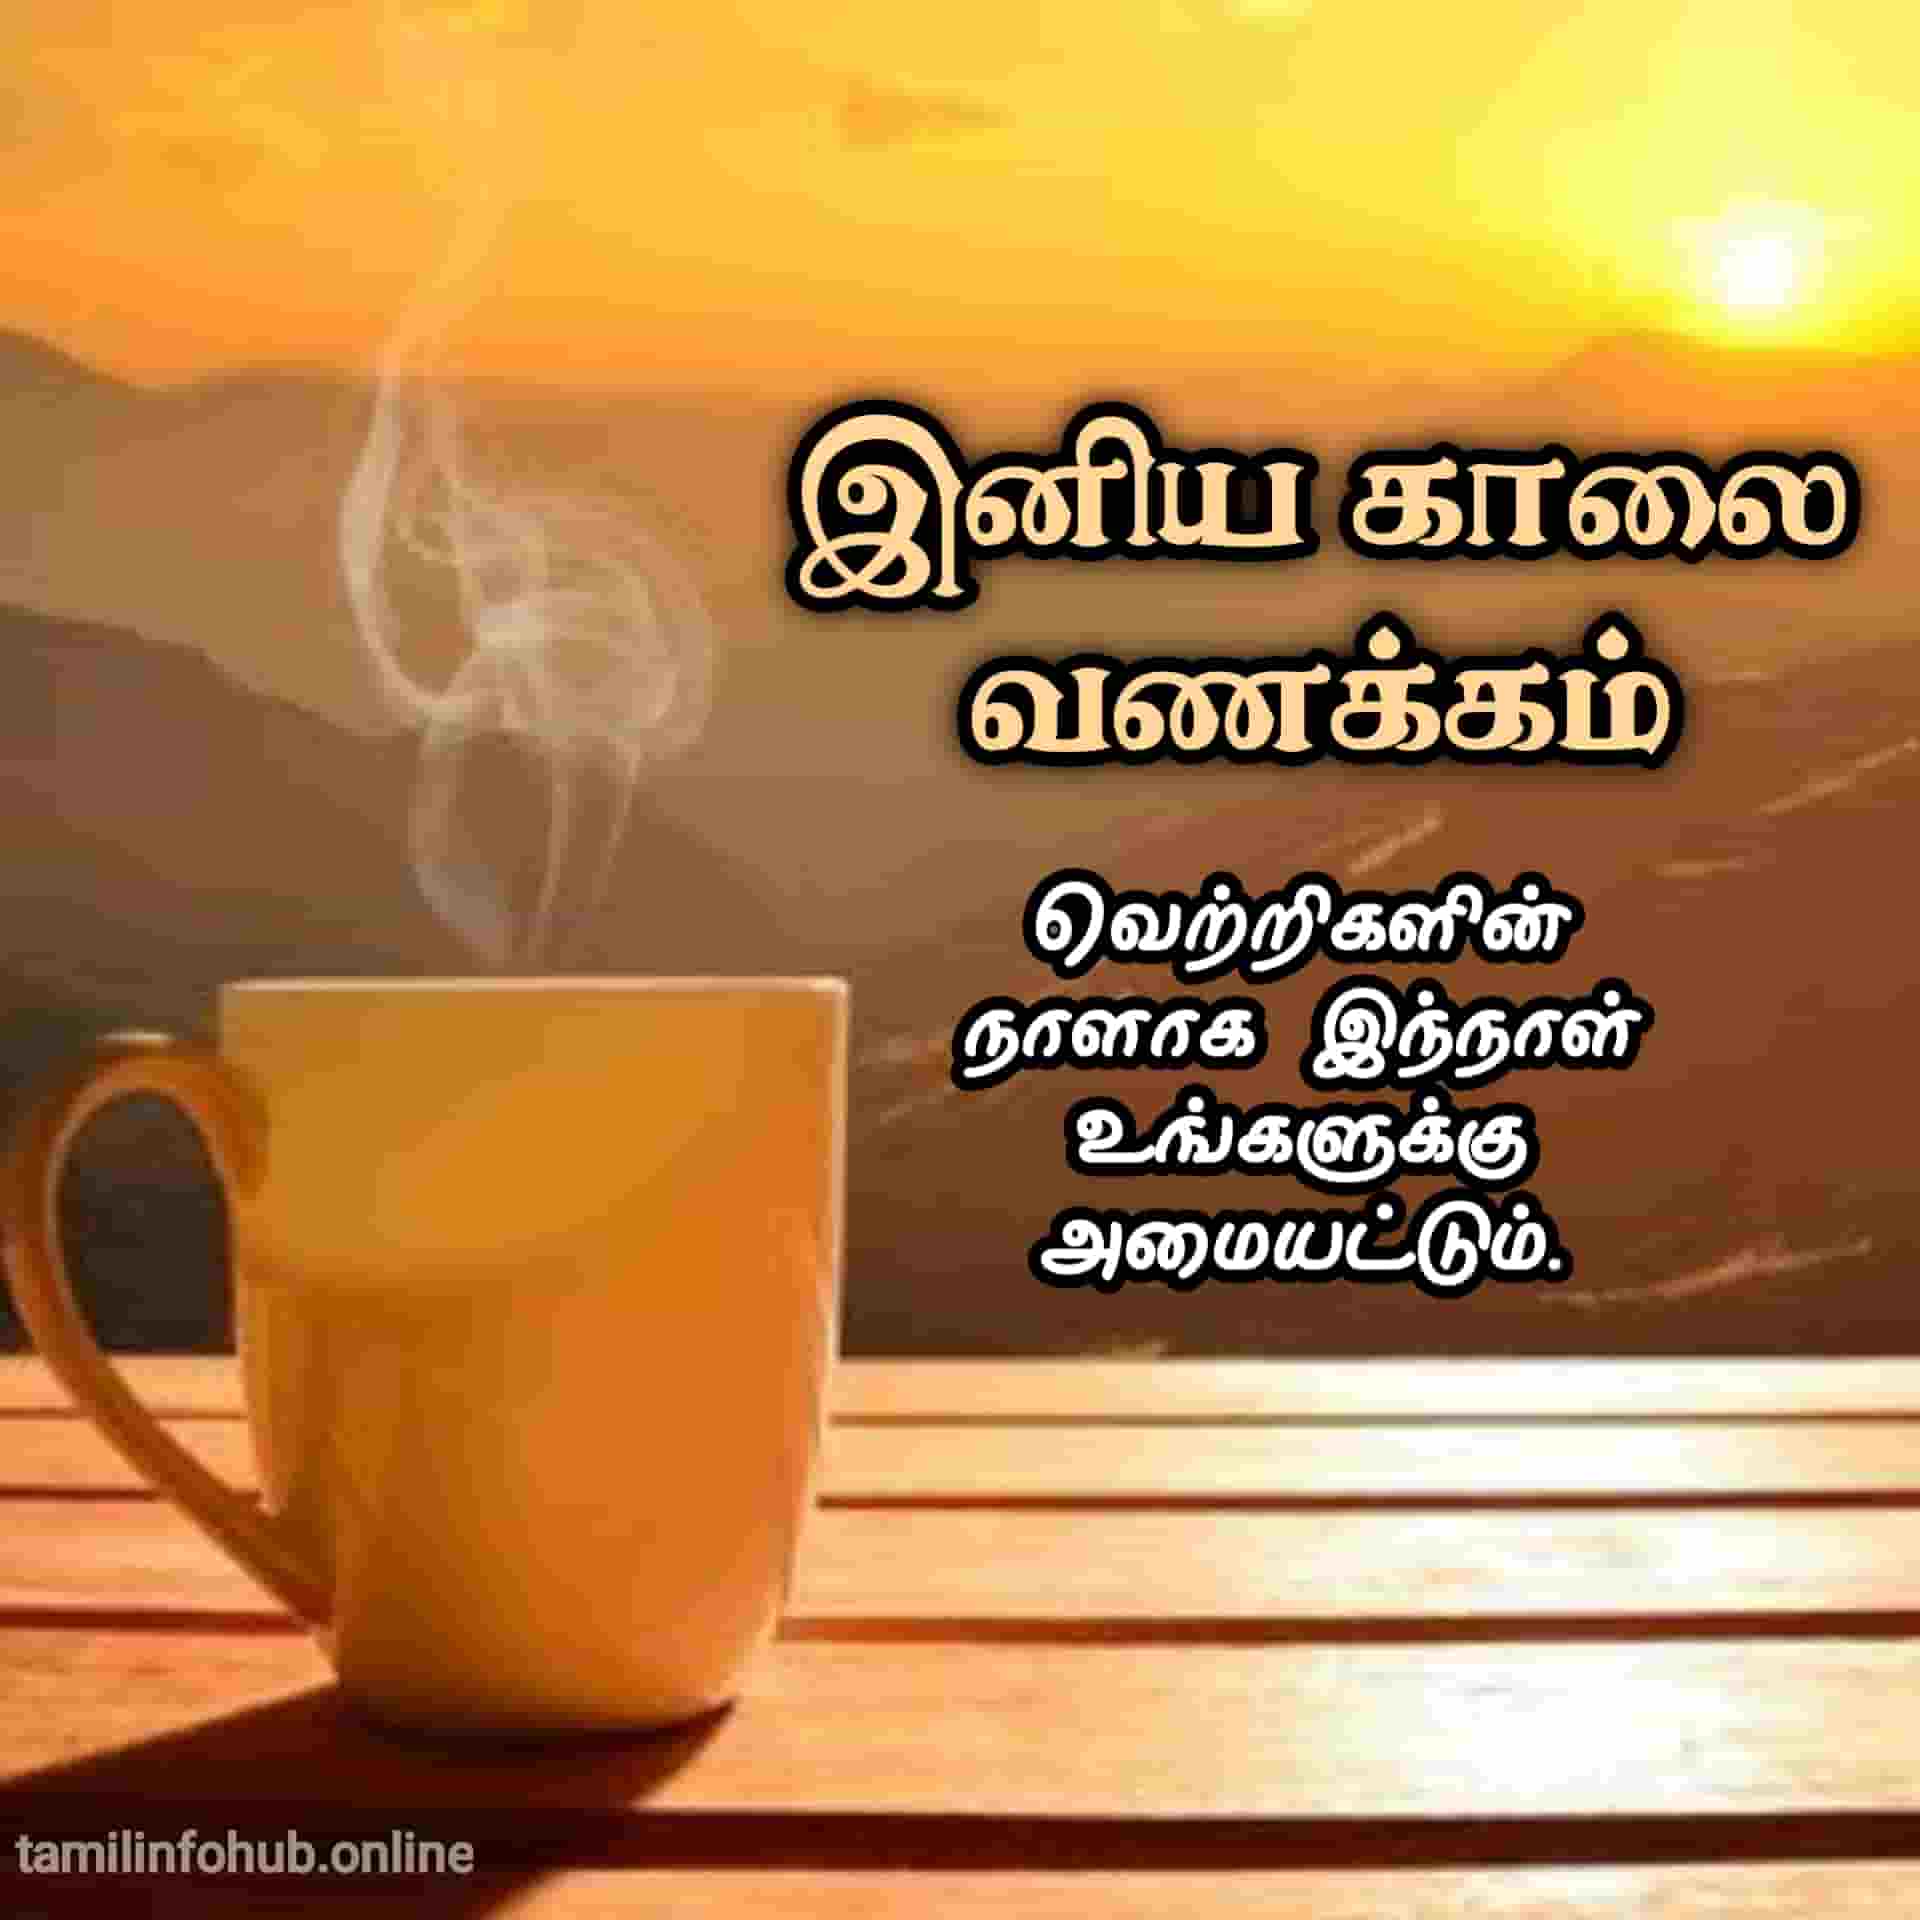 Tamil good morning images